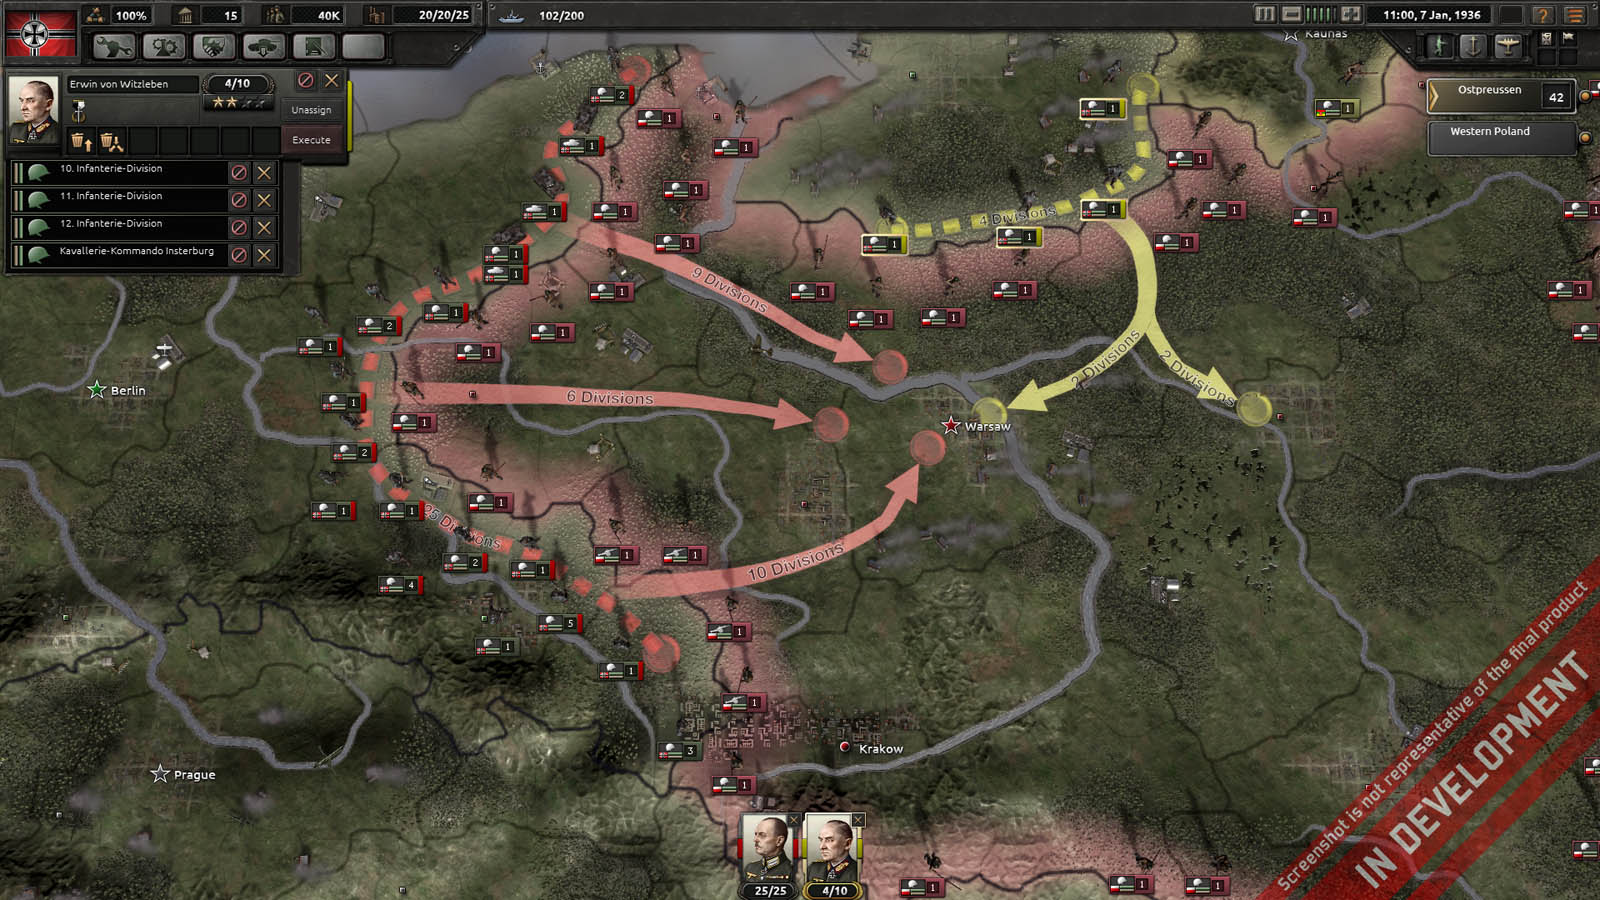 hearts-of-iron-iv-videos-talk-tanks-strategy-map-design